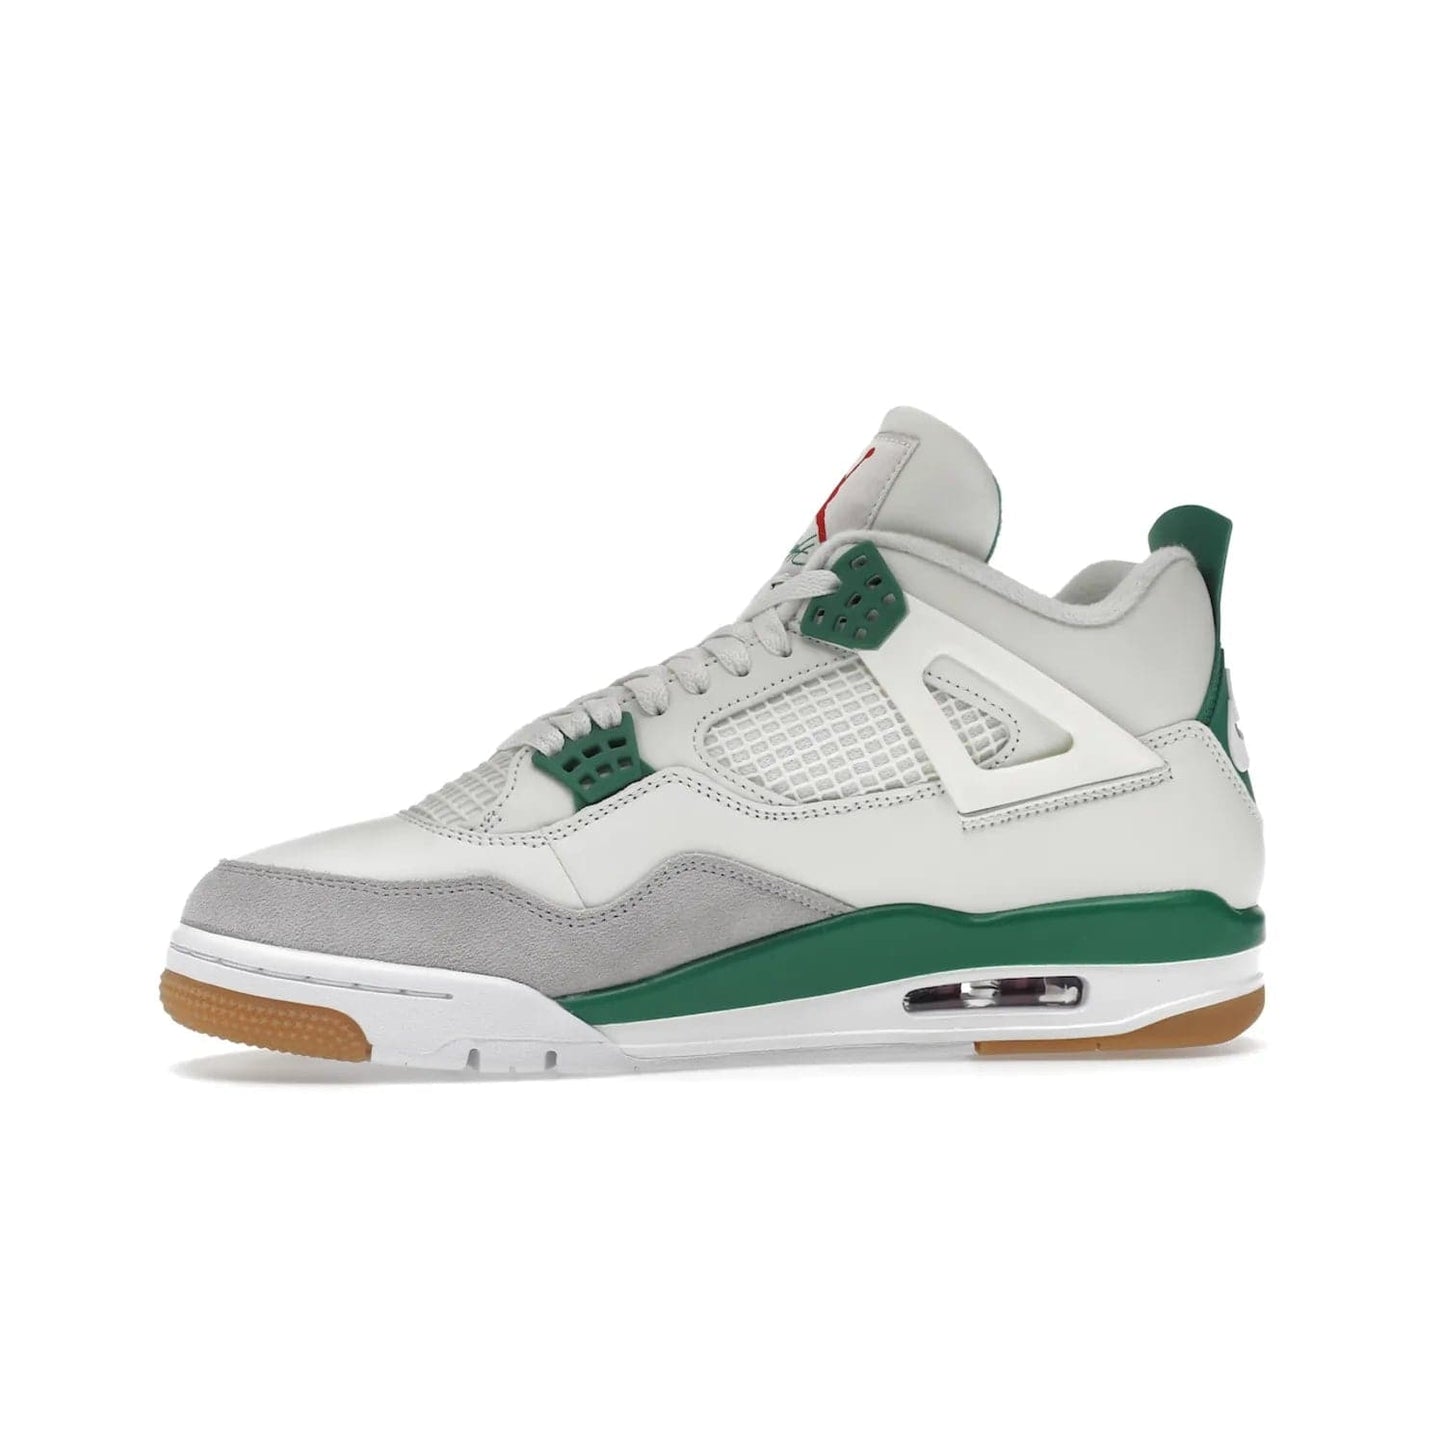 Jordan 4 Retro SB Pine Green - Image 18 - Only at www.BallersClubKickz.com - A white leather upper combined with a Neutral Grey suede mudguard gives this limited Air Jordan 4 Retro SB Pine Green sneaker its unmistakable style. Released March 20, 2023, the Jordan 4 Retro SB features a white and Pine Green midsole plus a red air unit with a gum outsole for grip. The perfect blend of Nike SB skateboarding and Jordan 4 classic design.